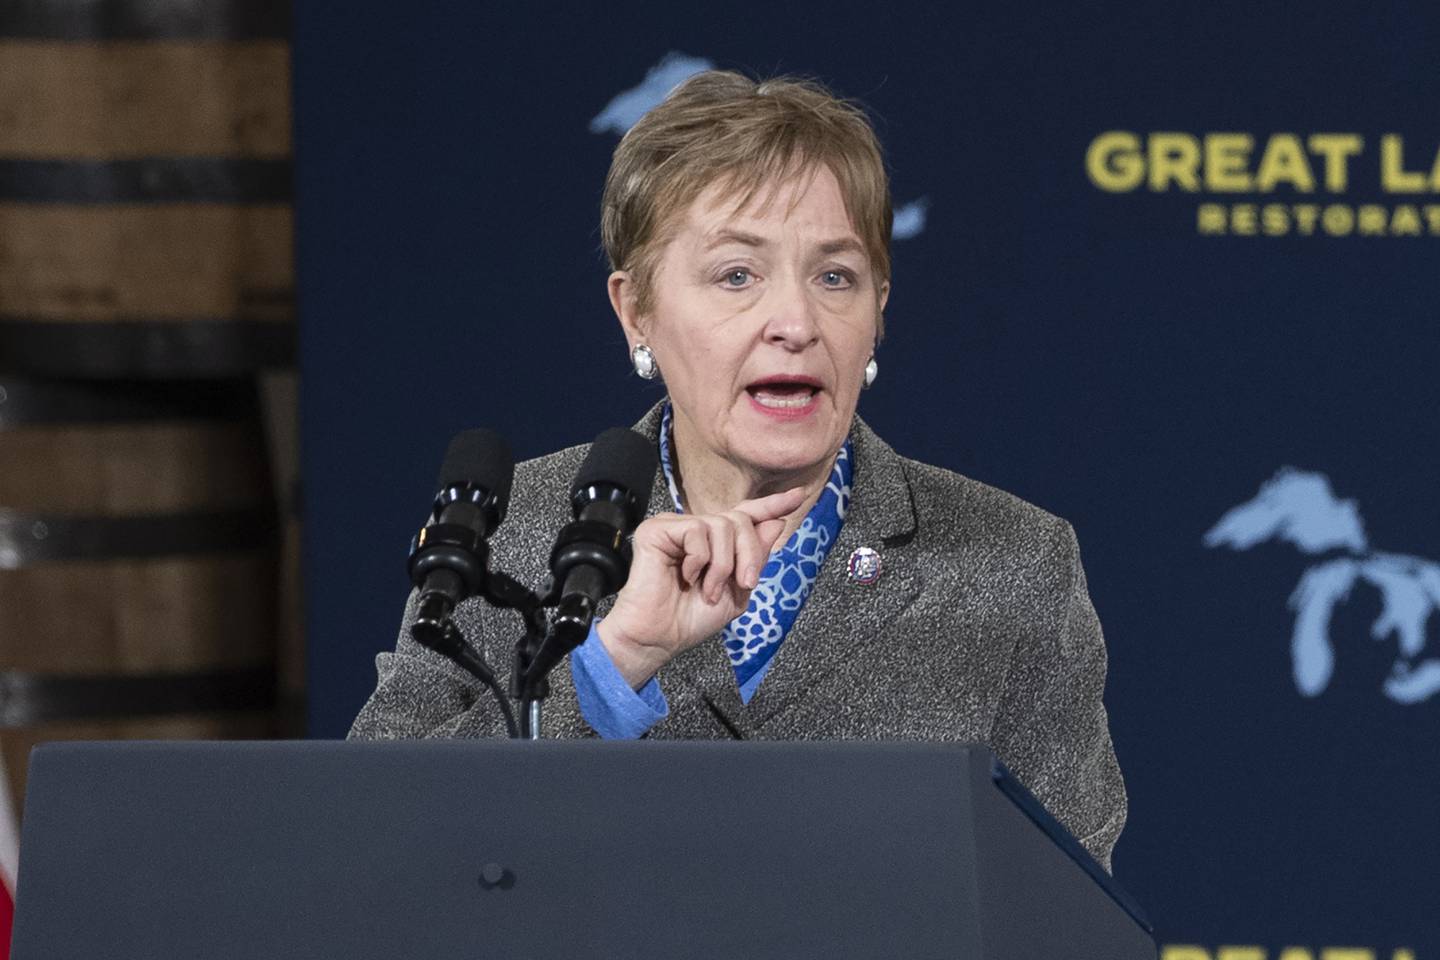 Rep. Marcy Kaptur, D-Ohio, speaks during an event at the Shipyards on Feb. 17, 2022, in Lorain, Ohio.